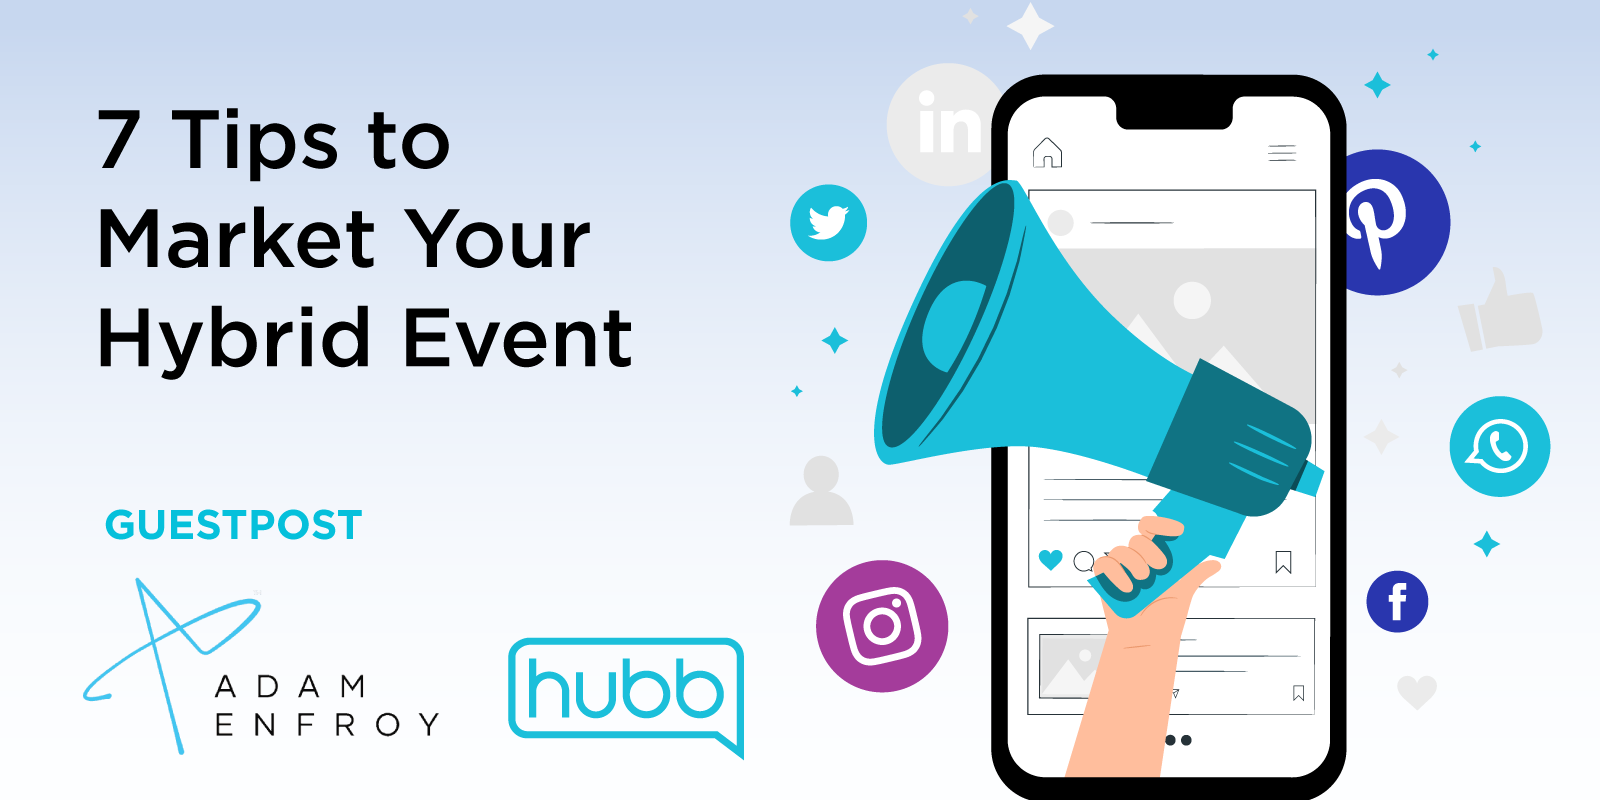 7 Tips to Market Your Hybrid Event